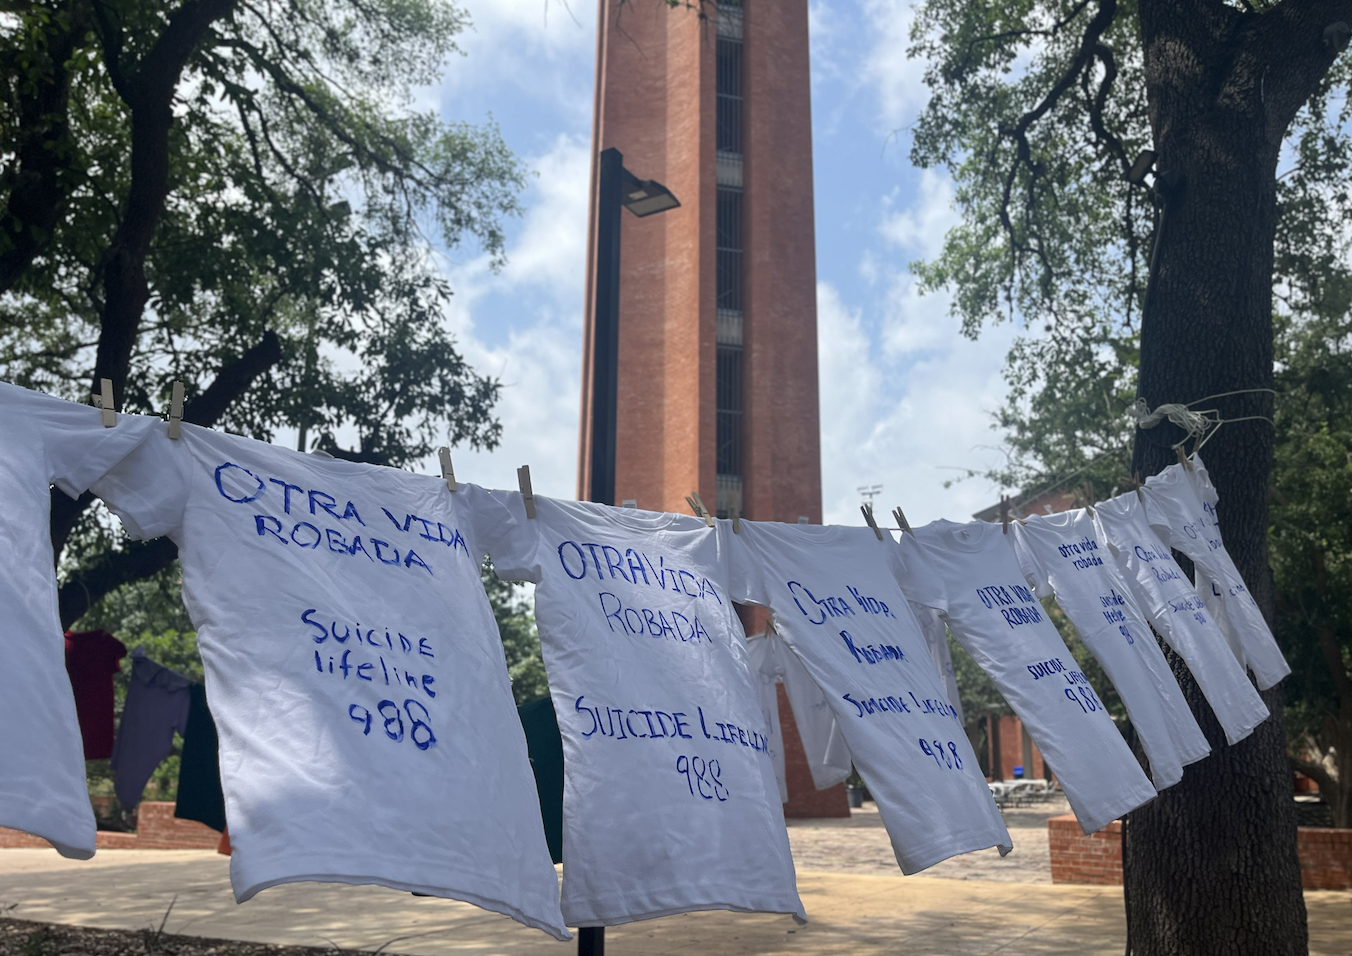 Shirts memorializing suicide victims in front of Trinity Tower